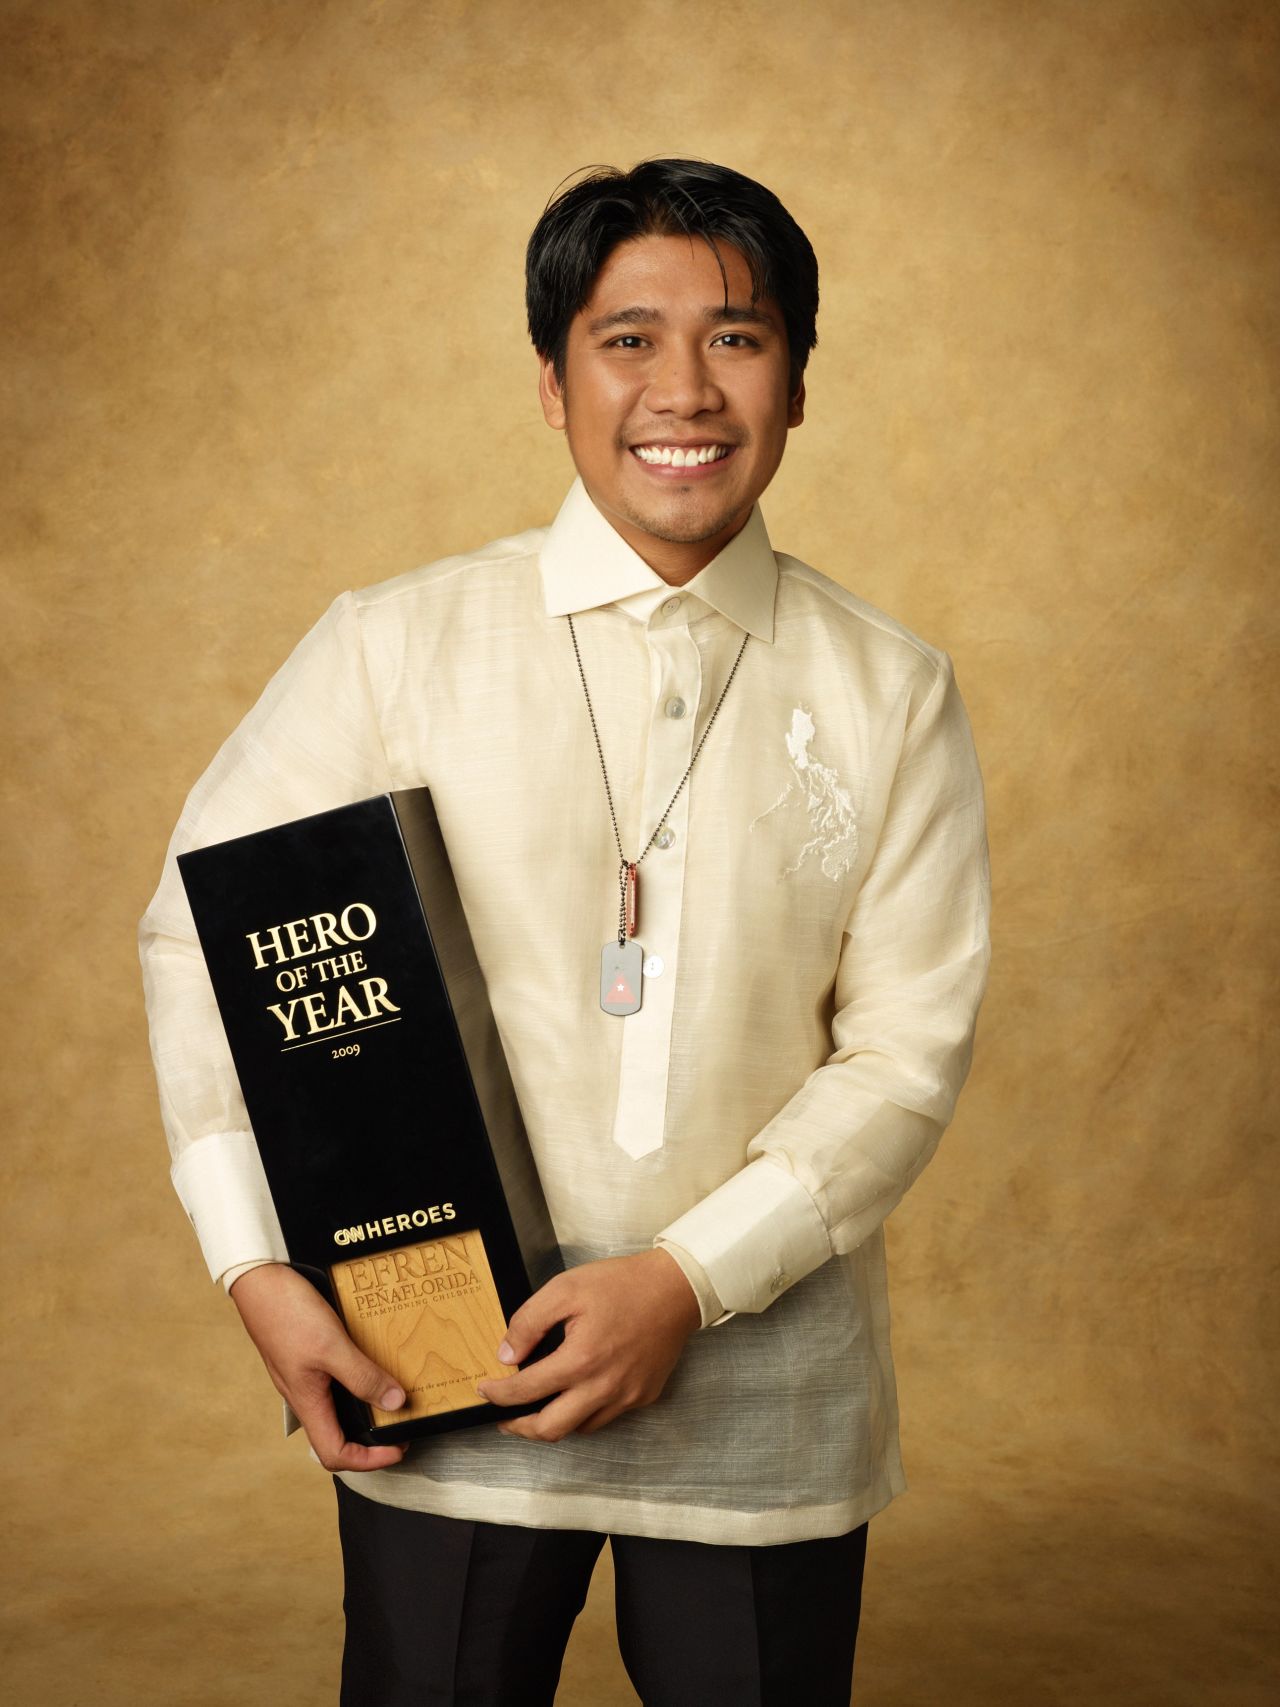 Efren Peñaflorida's nonprofit, <a href="http://dtc.org.ph/" target="_blank" target="_blank">Dynamic Teen Company</a>, brings education to children who have dropped out of school. Since he was named a CNN Hero of the Year, Peñaflorida's team has taught an estimated 40,000 kids around the world.